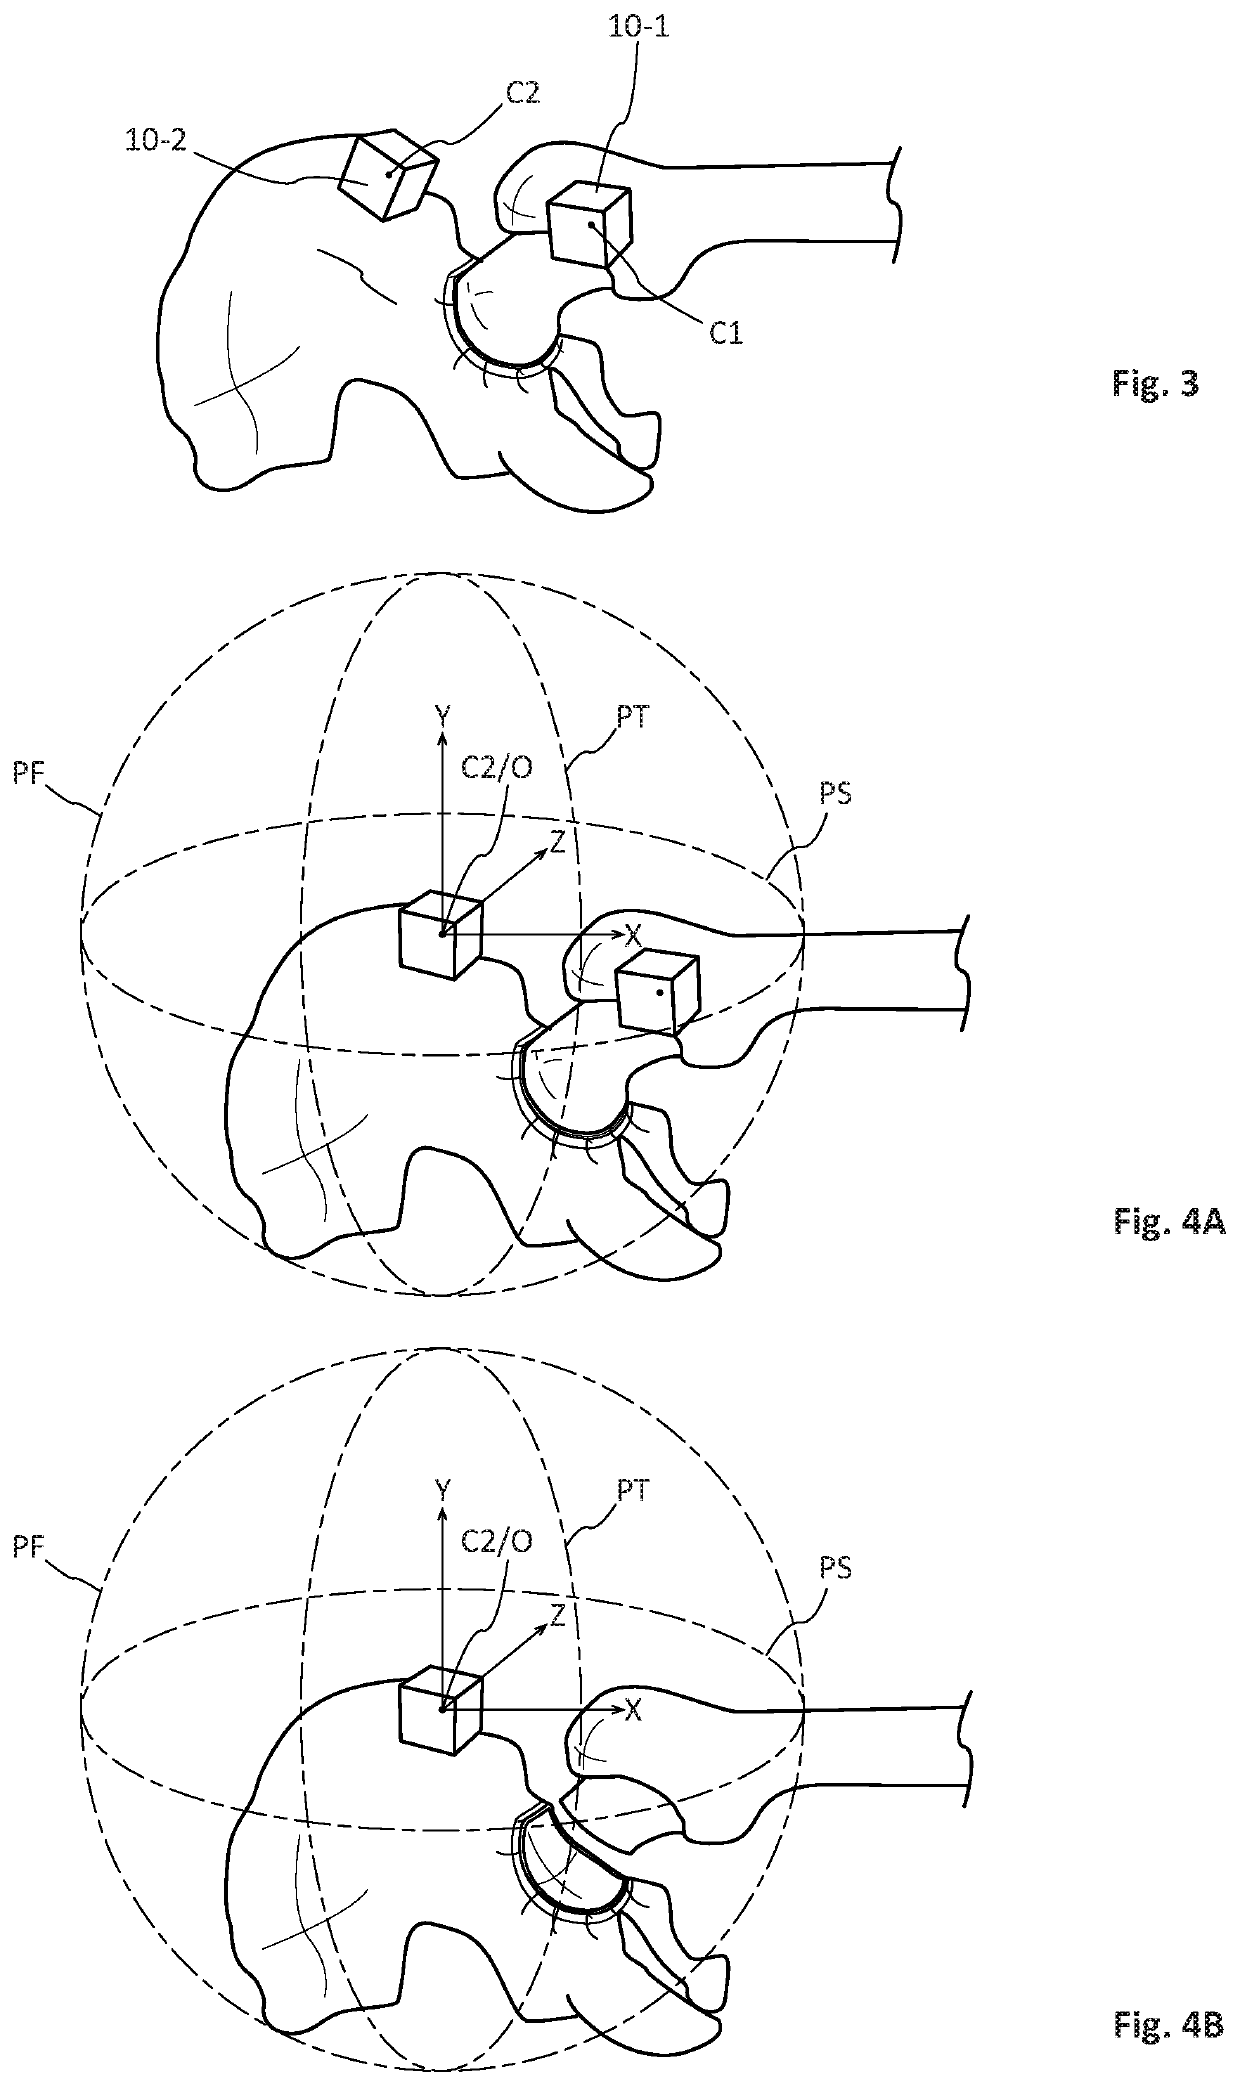 Method and device for assisting a surgeon fit a prosthesis, in particular a hip prosthesis, following different surgical protocols